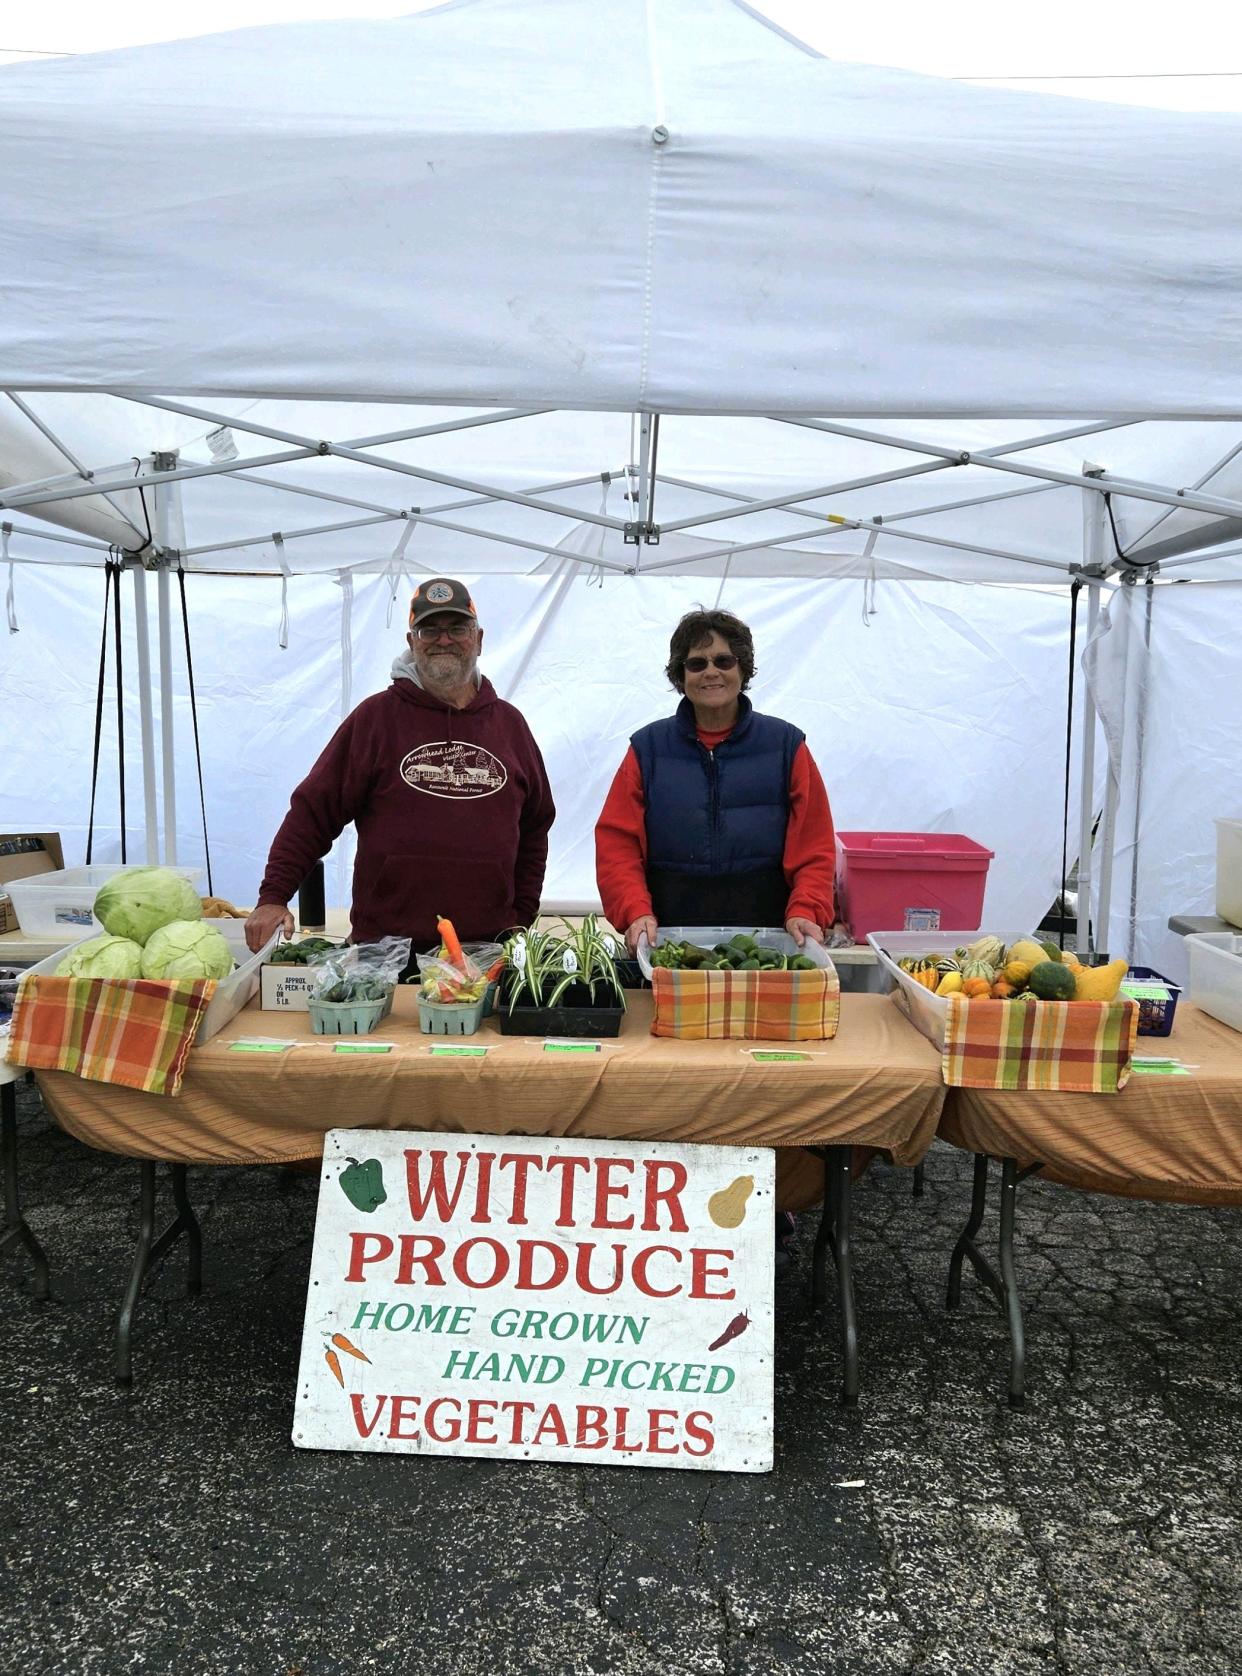 John and Becky Witter can be found each year at the Bucyrus Farmers Market, which runs May-October. “The vendors who want to participate in the market can join at any time throughout the year,” Becky Witter said. (PROVIDED BY BECKY WITTER)